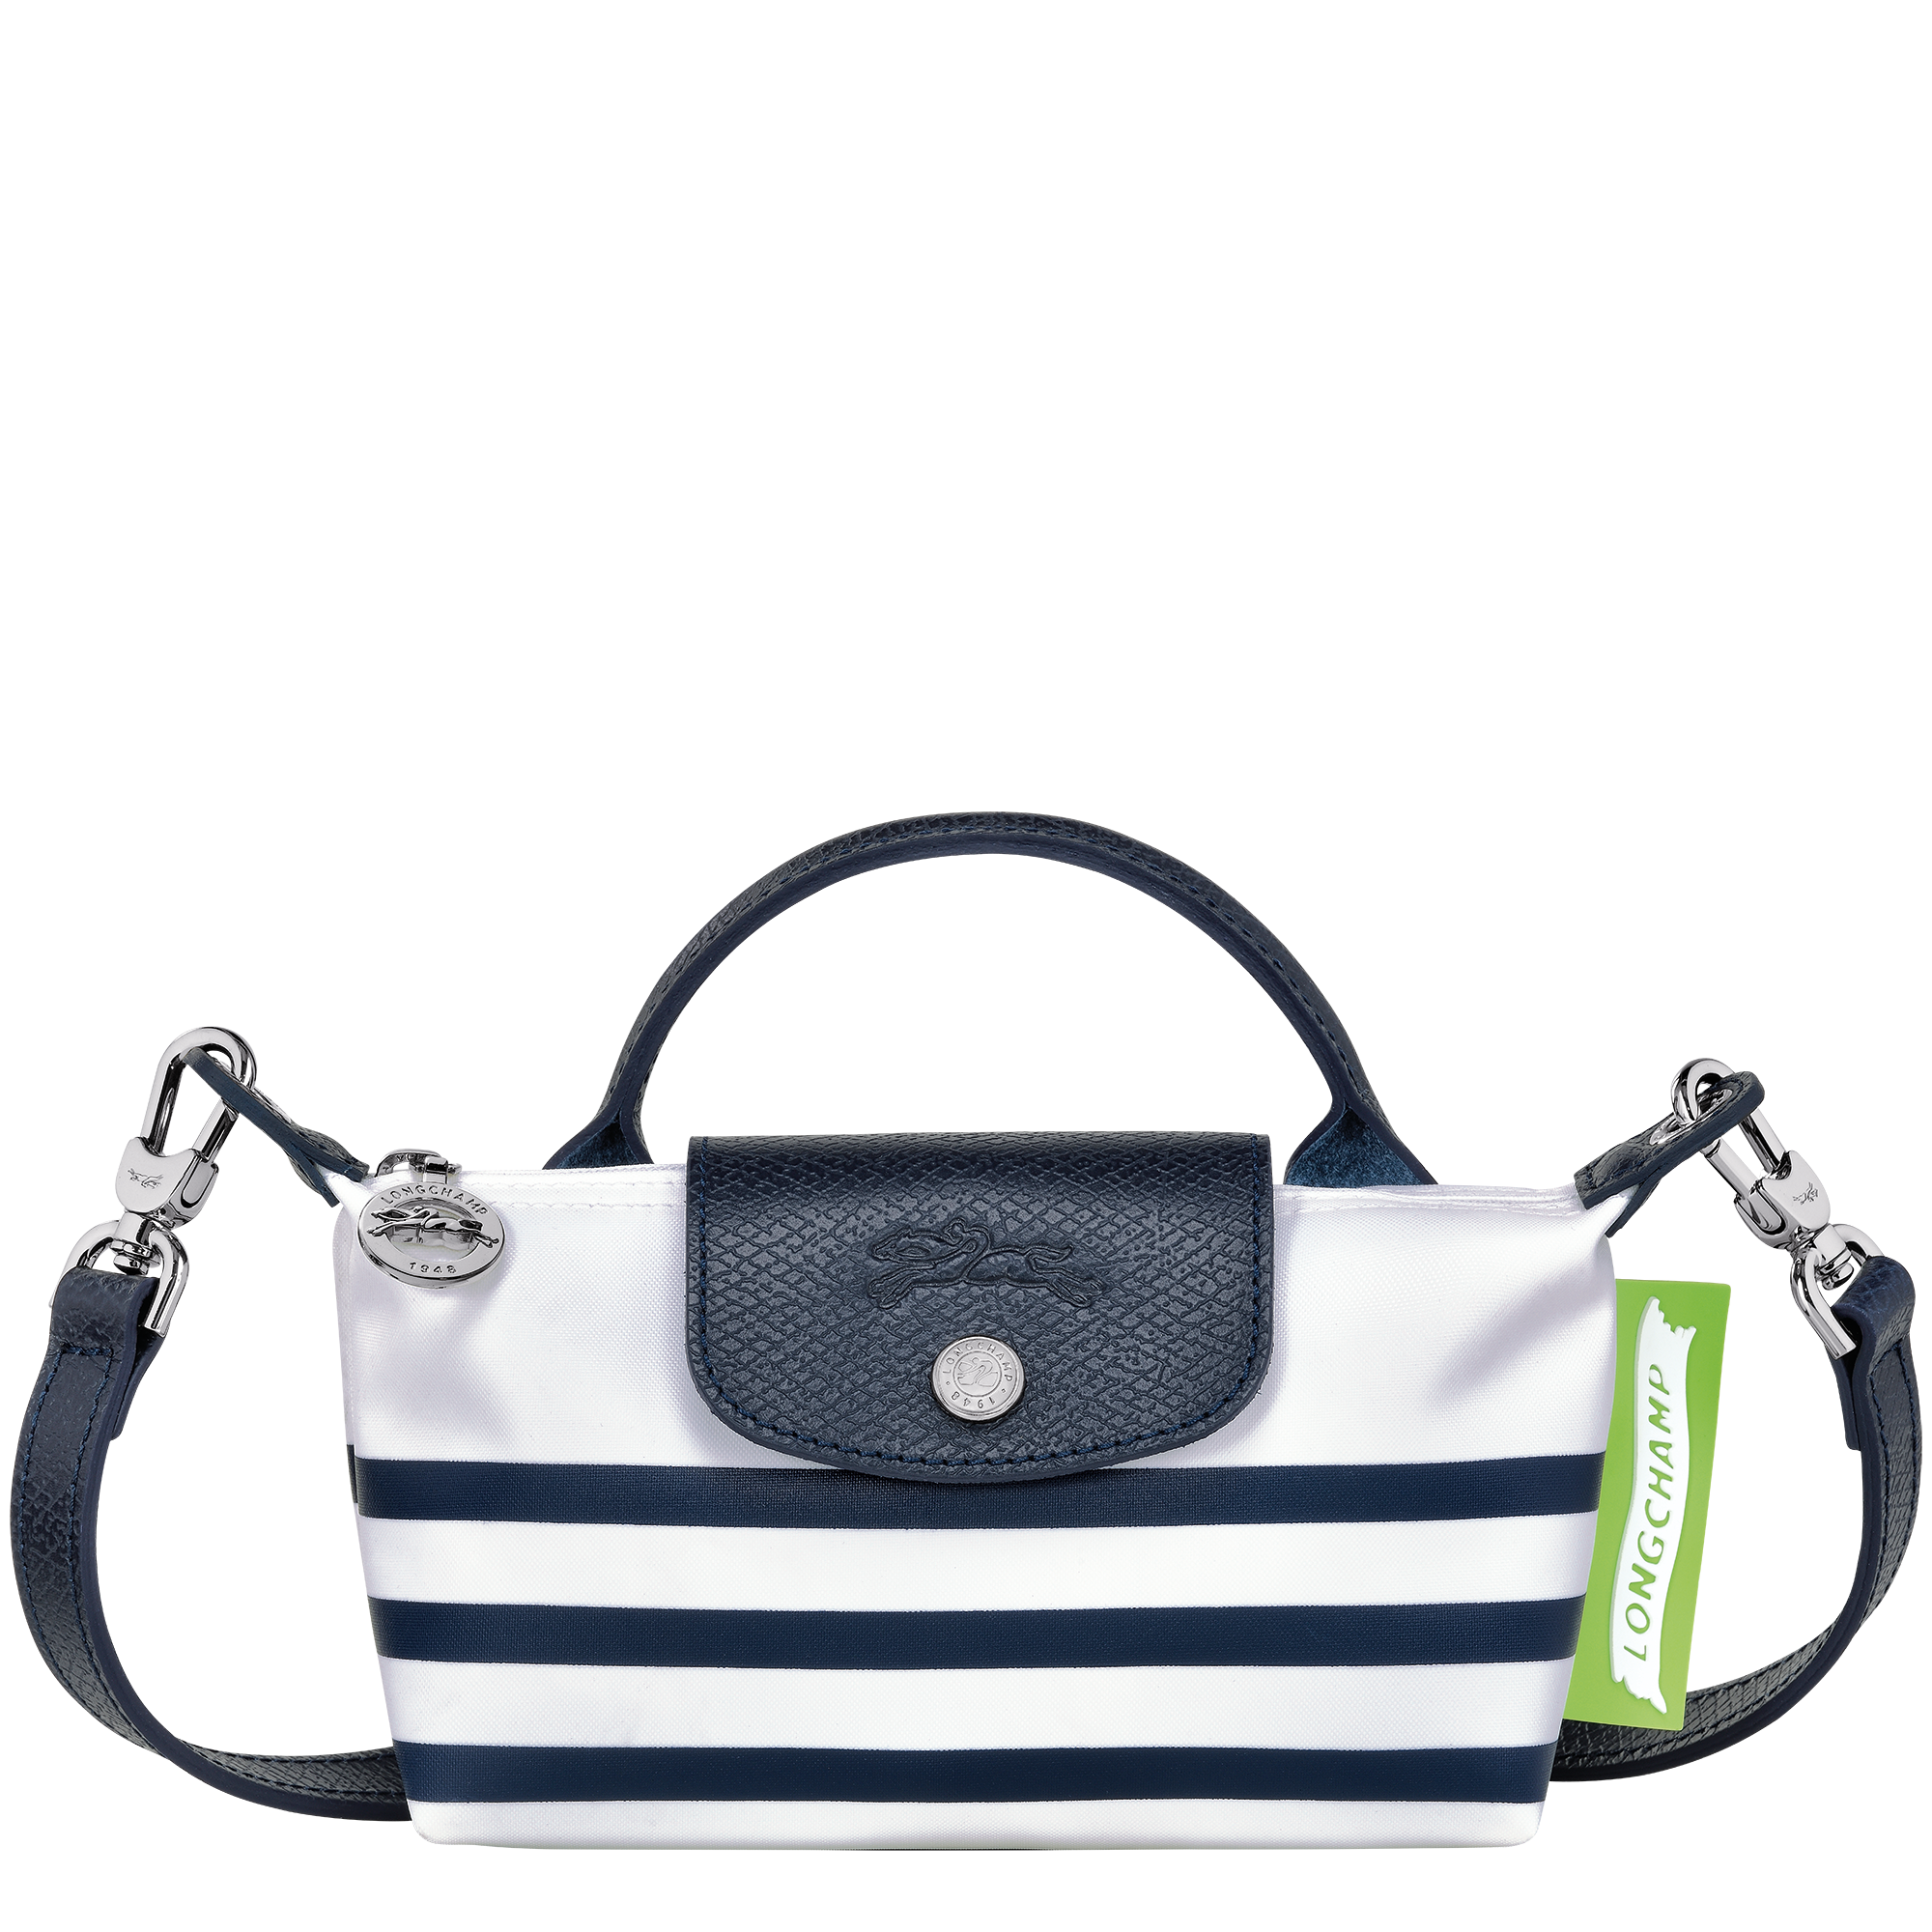 LE PLIAGE COLLECTION - Pouch in Navy/White (34205HDF165